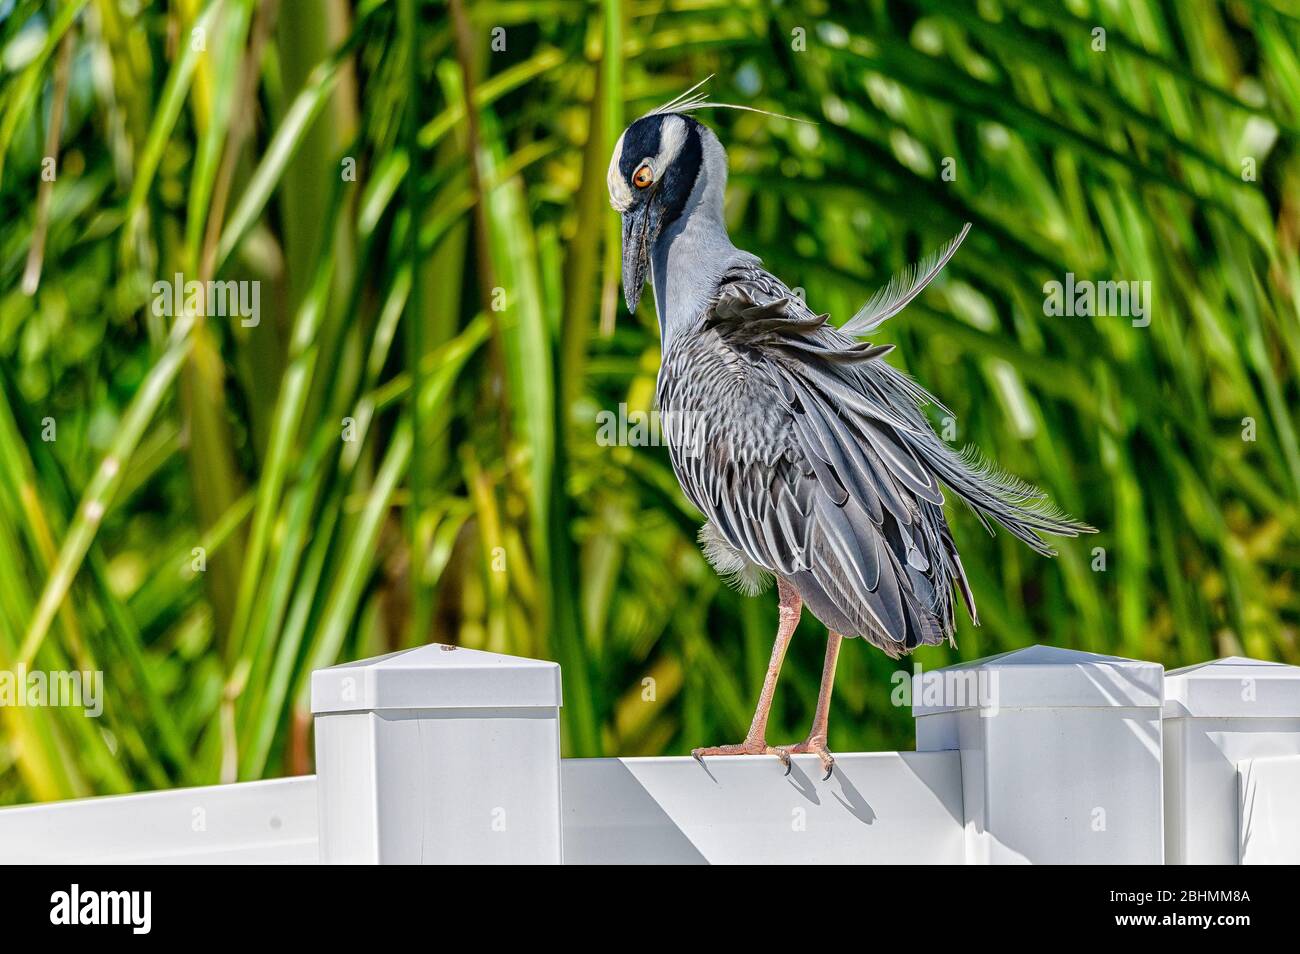 Yellow crowned night heron visiting the backyard during stay at home lockdown Stock Photo